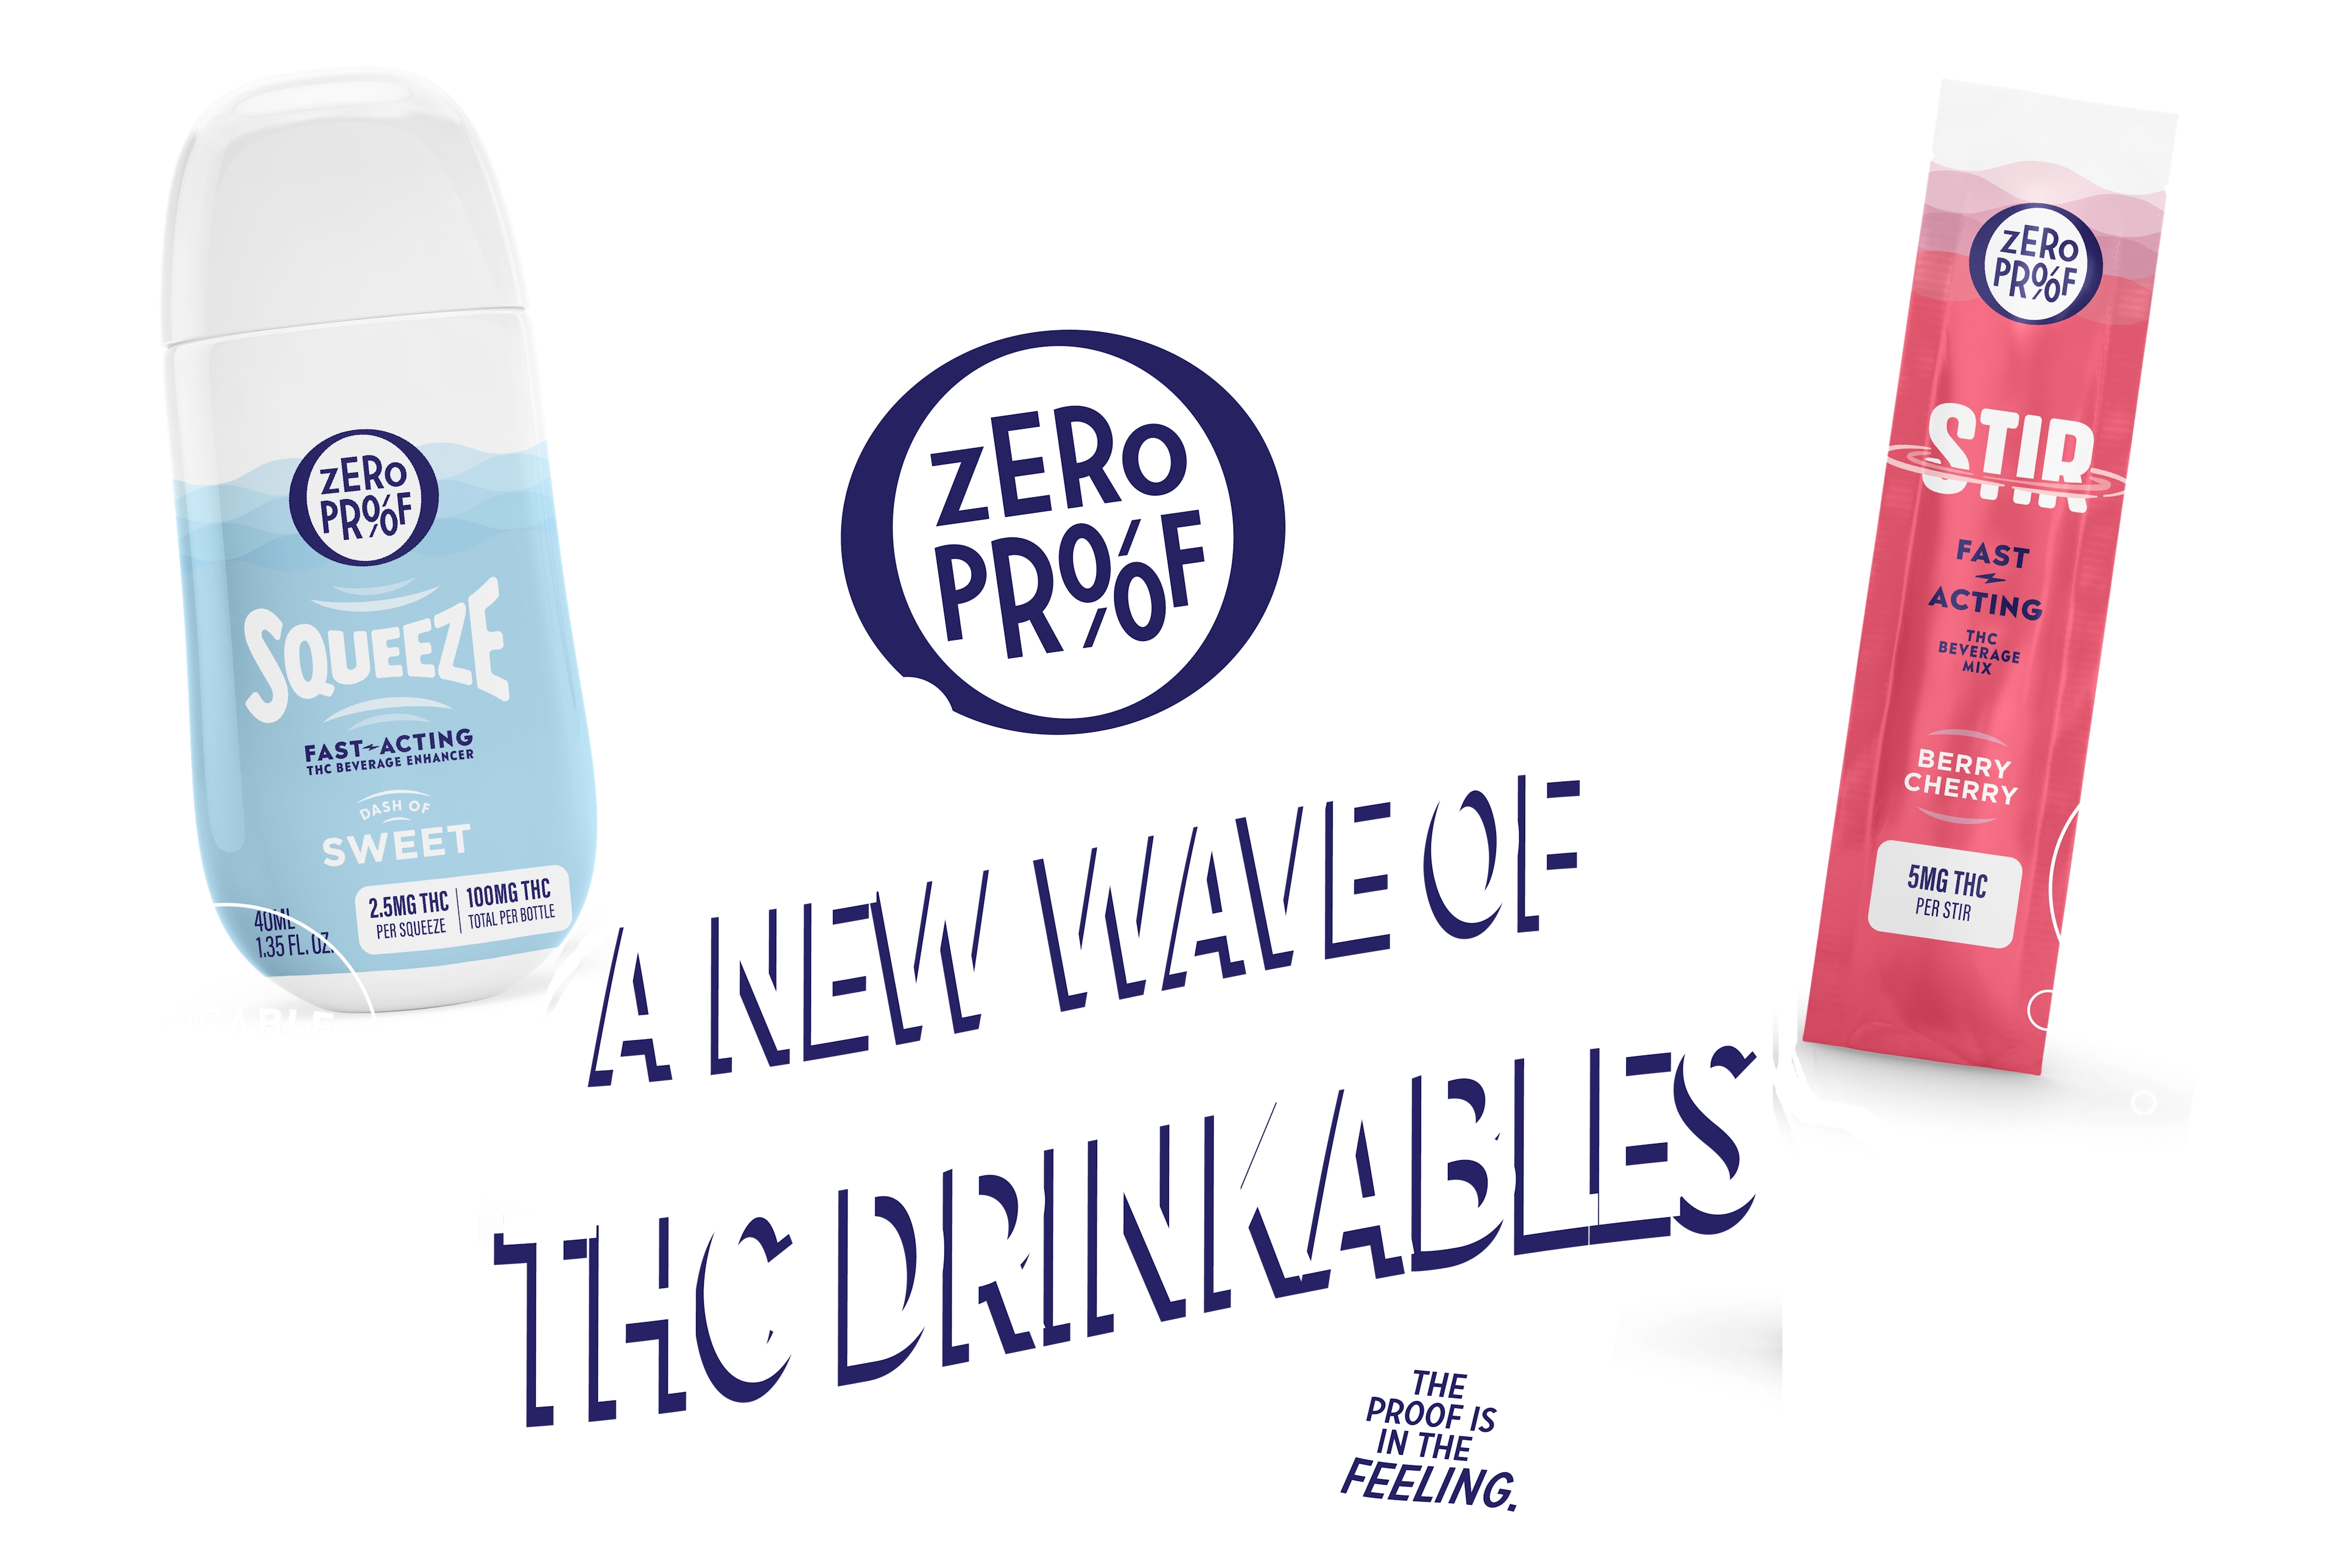 Introducing ZEROPROOF a new wave of THC drinkables.